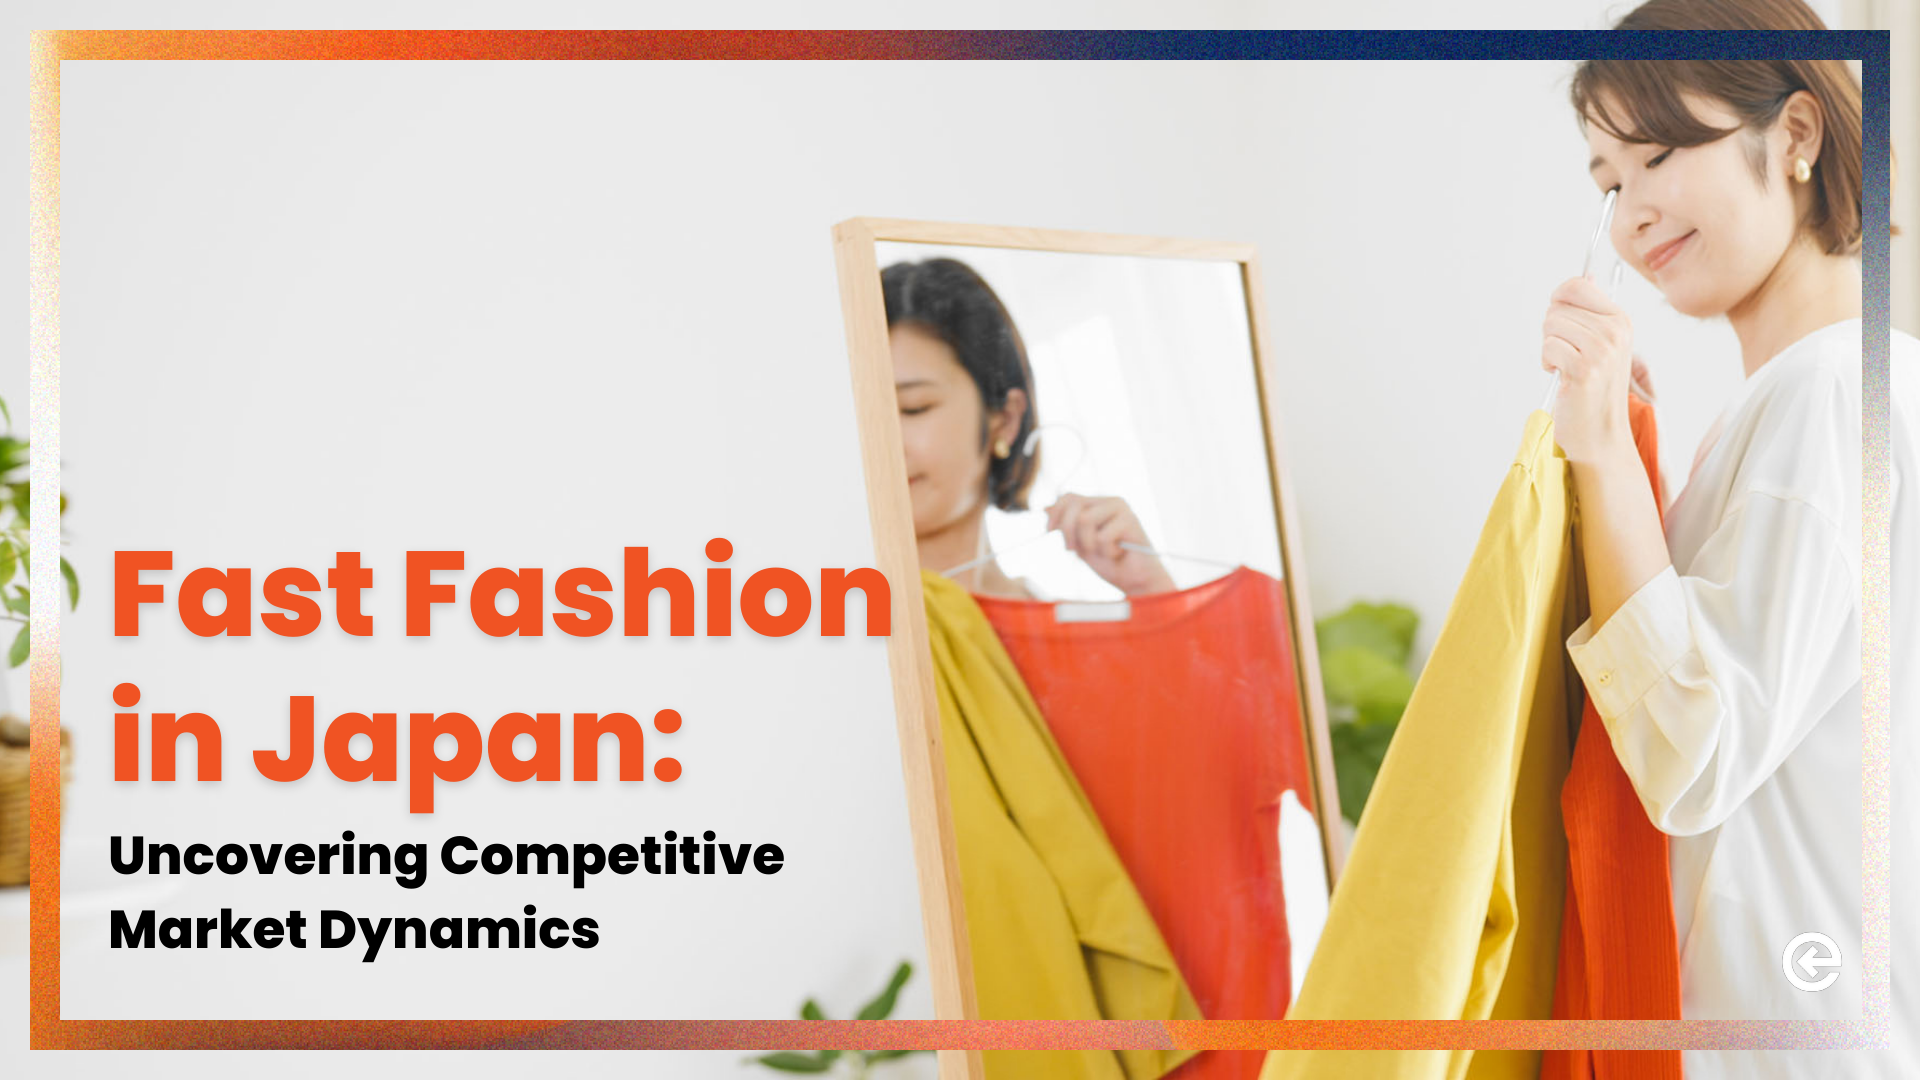 Fast Fashion in Japan: Uncovering Competitive Market Dynamics